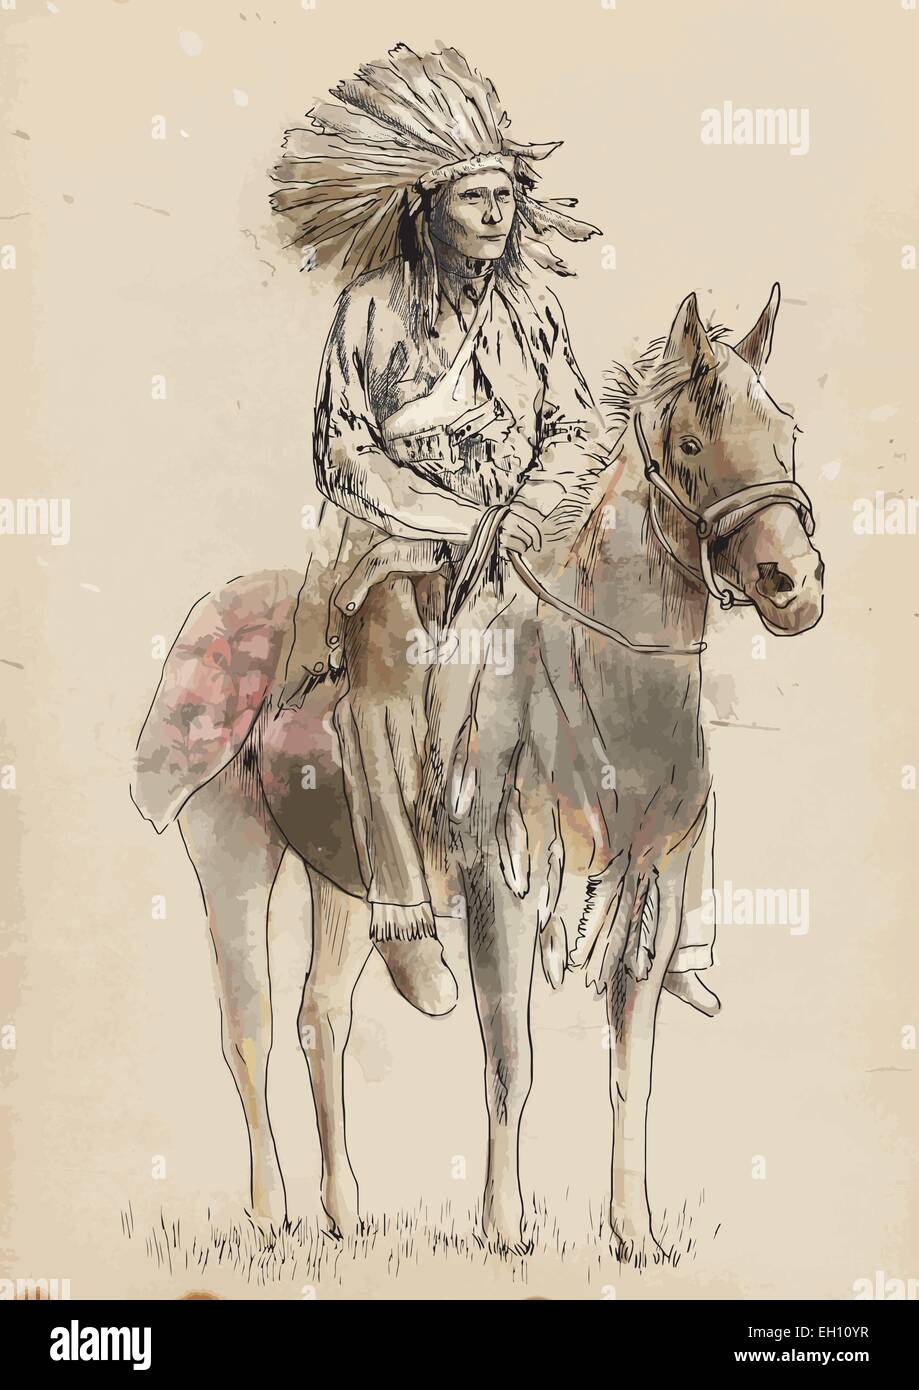 An hand drawn vector illustration. Indian chief sitting on a horse. Stock Vector